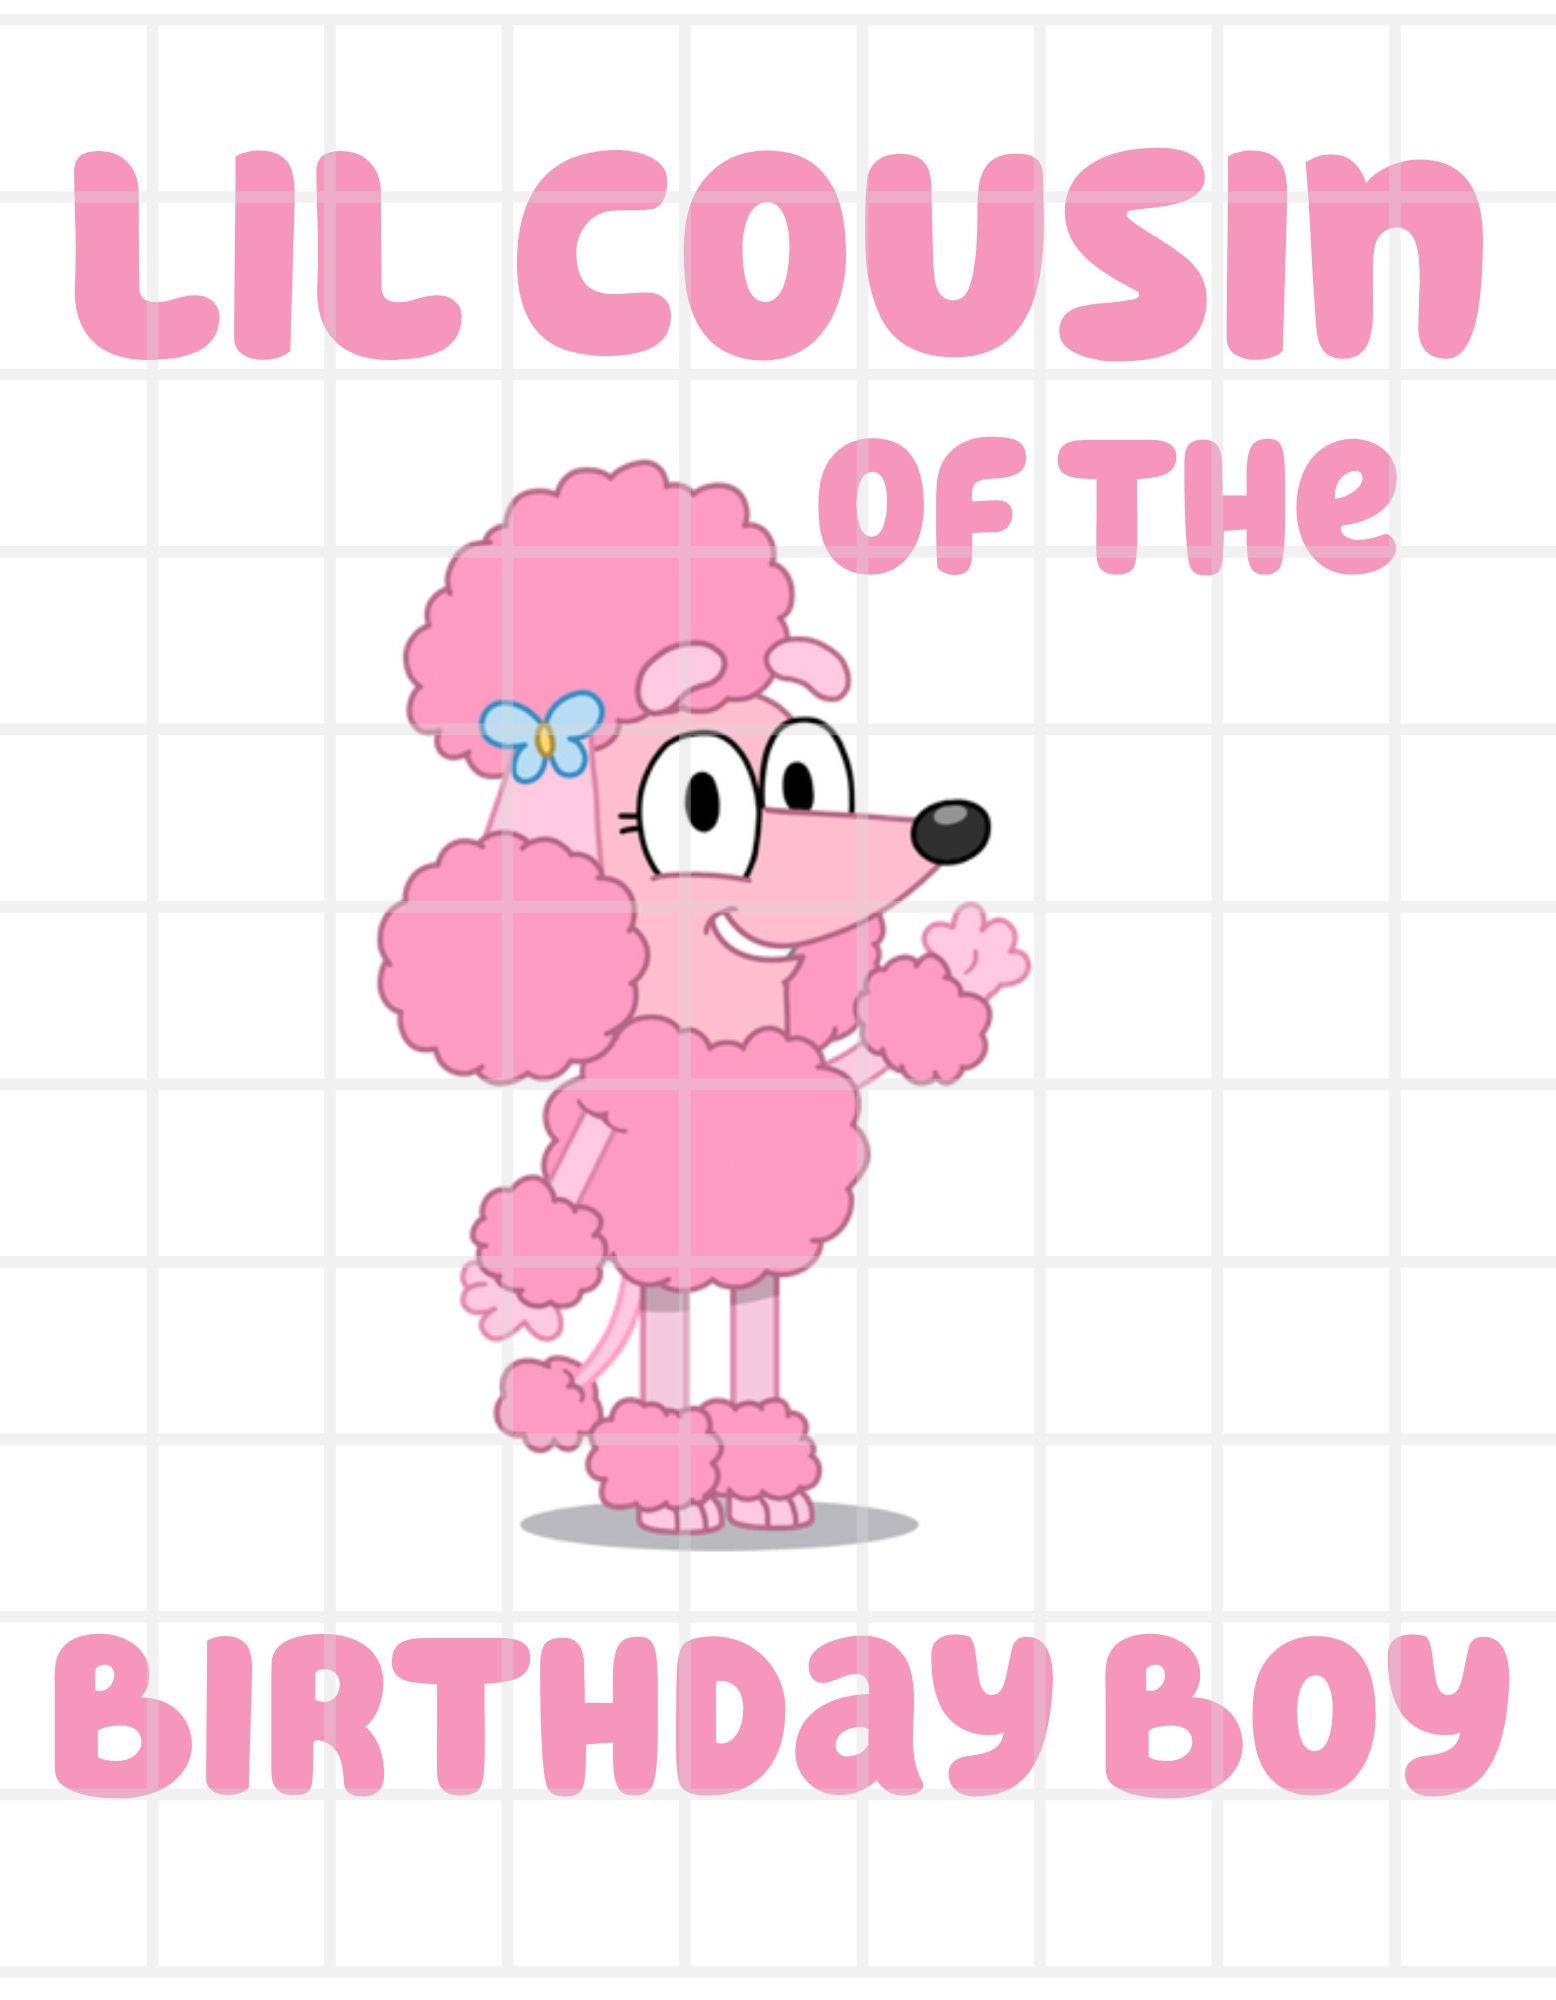 Bluey-Themed Cousin of the Birthday Boy Iron-On Transfer – Personalize the Party with Whimsical Charm